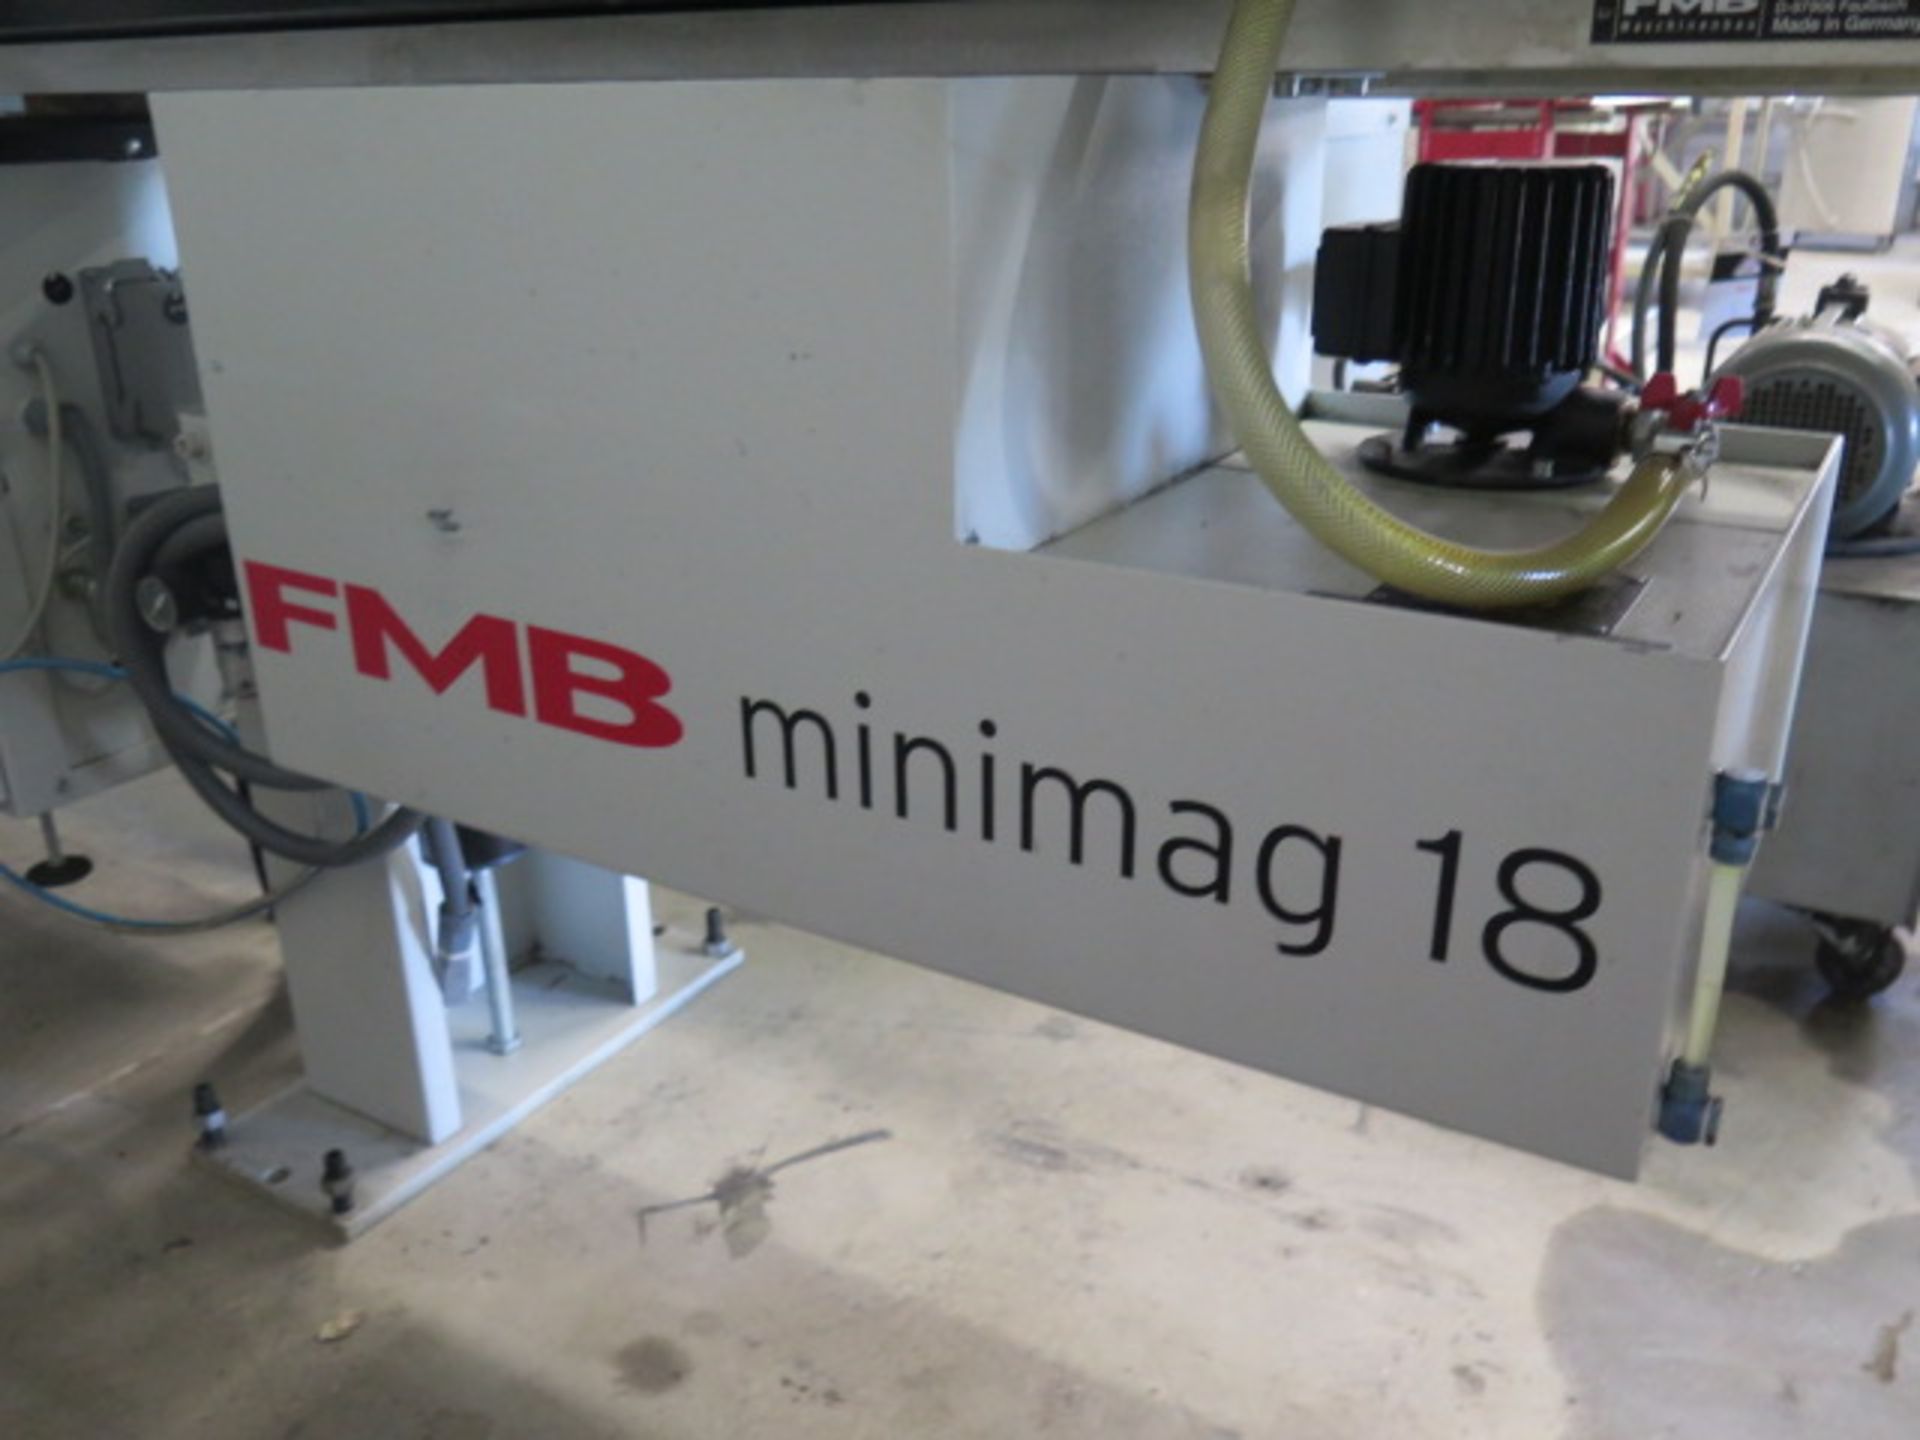 FMB / Edge Technologies "Minimag 18" Automatic Bar Loader / Feeder s/n 36-161505 SOLD AS IS - Image 5 of 9